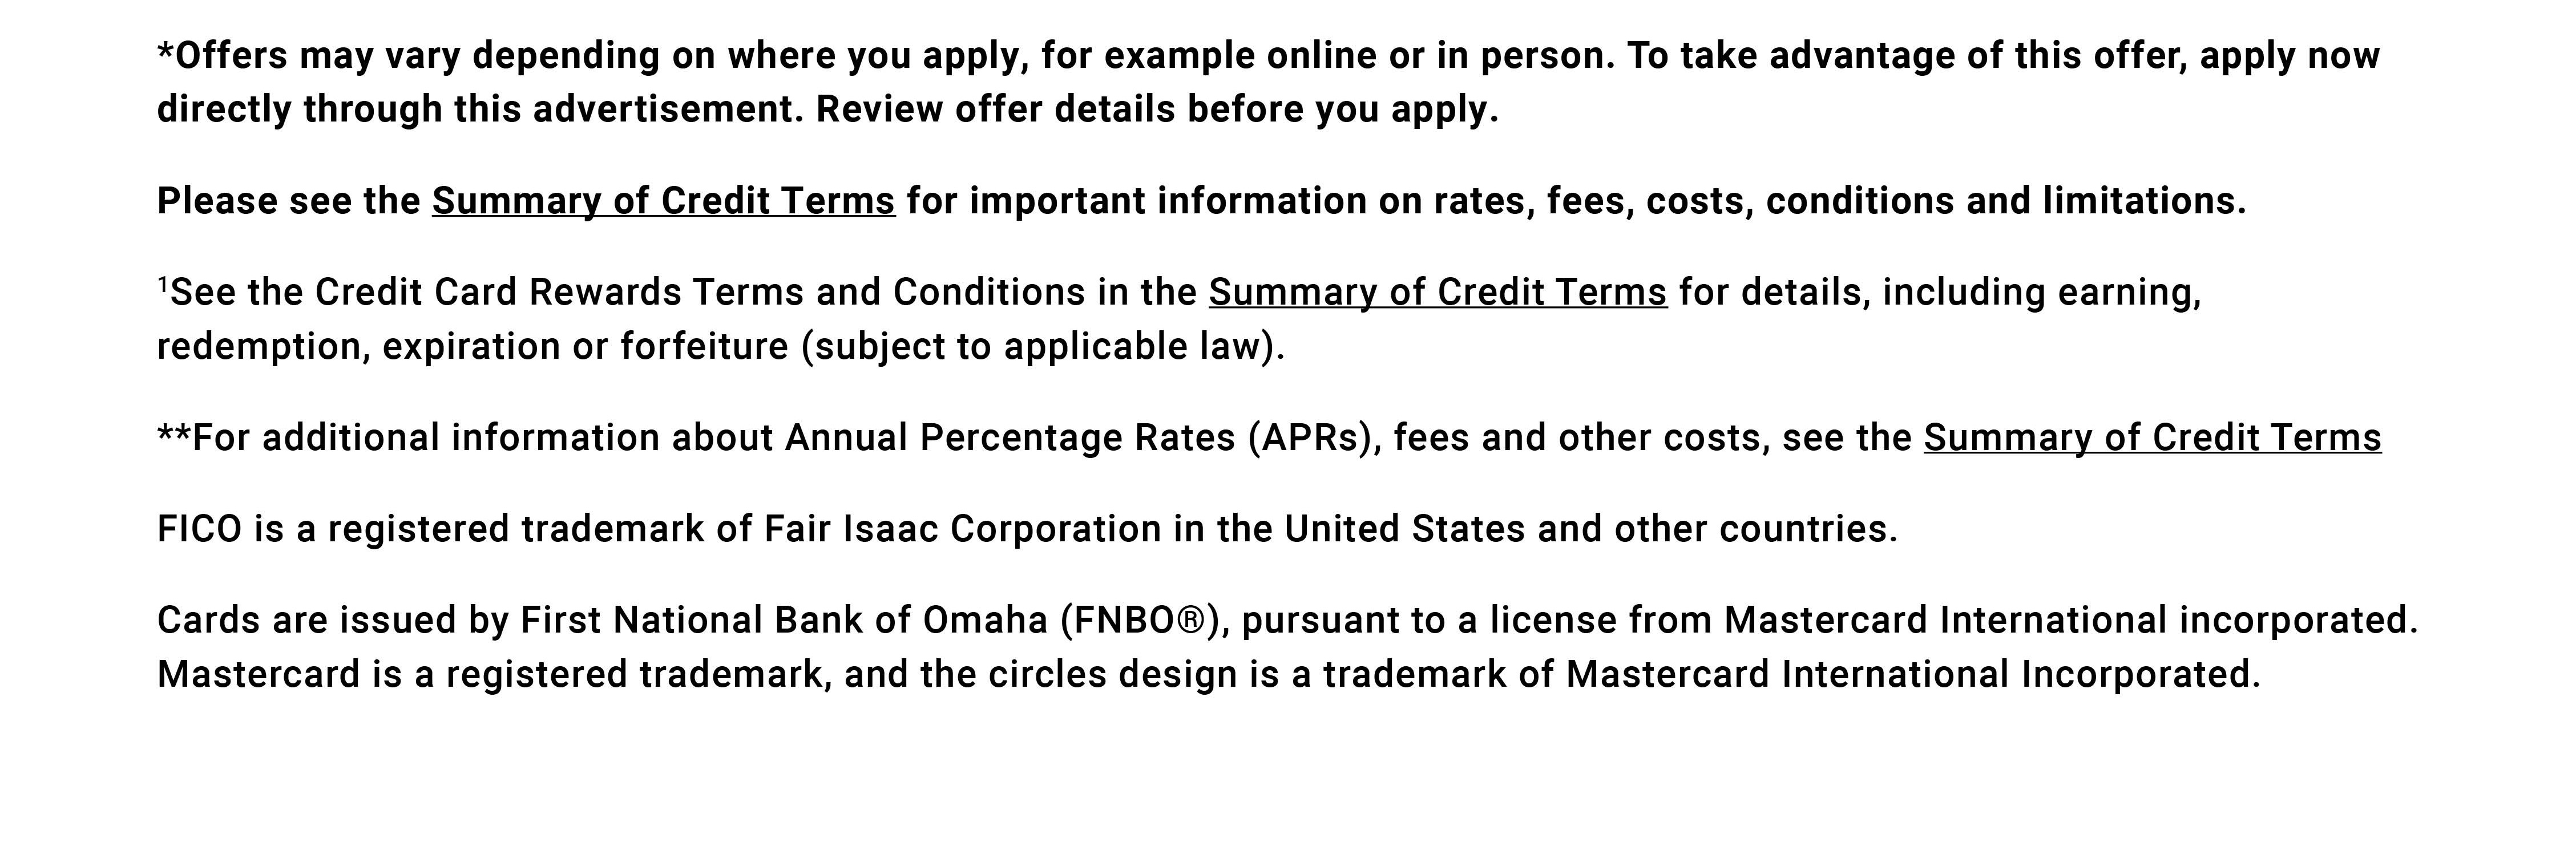 Summary of Credit Terms